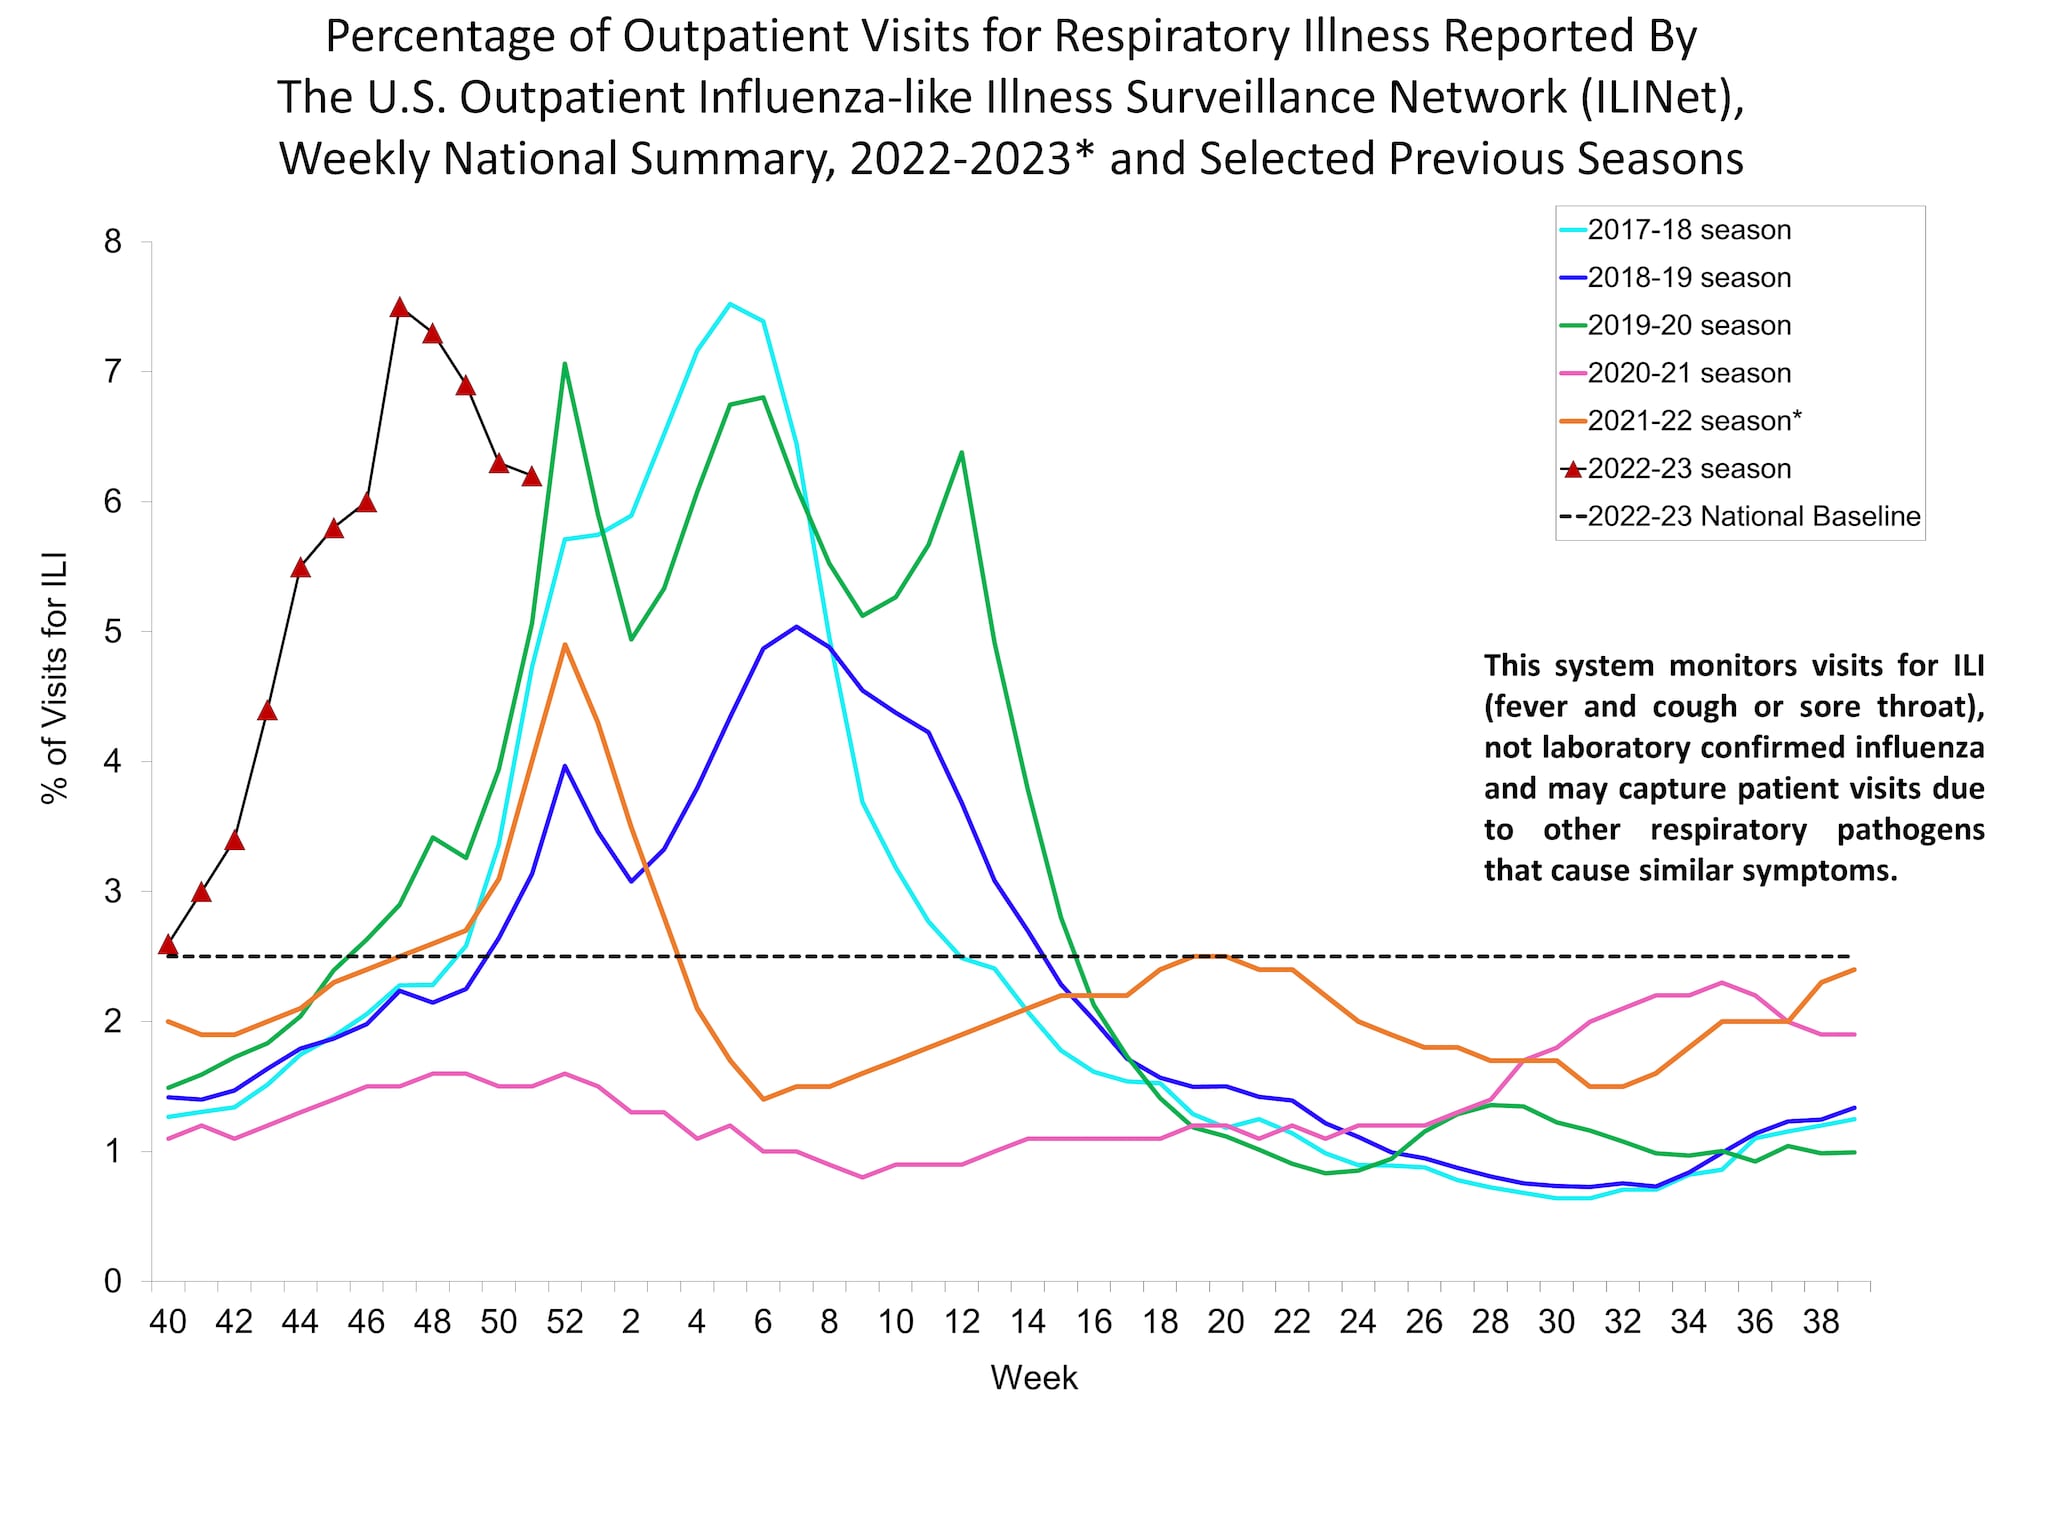 Percent of Visits for Influenzalike Illness (ILI) Reported by the U.S